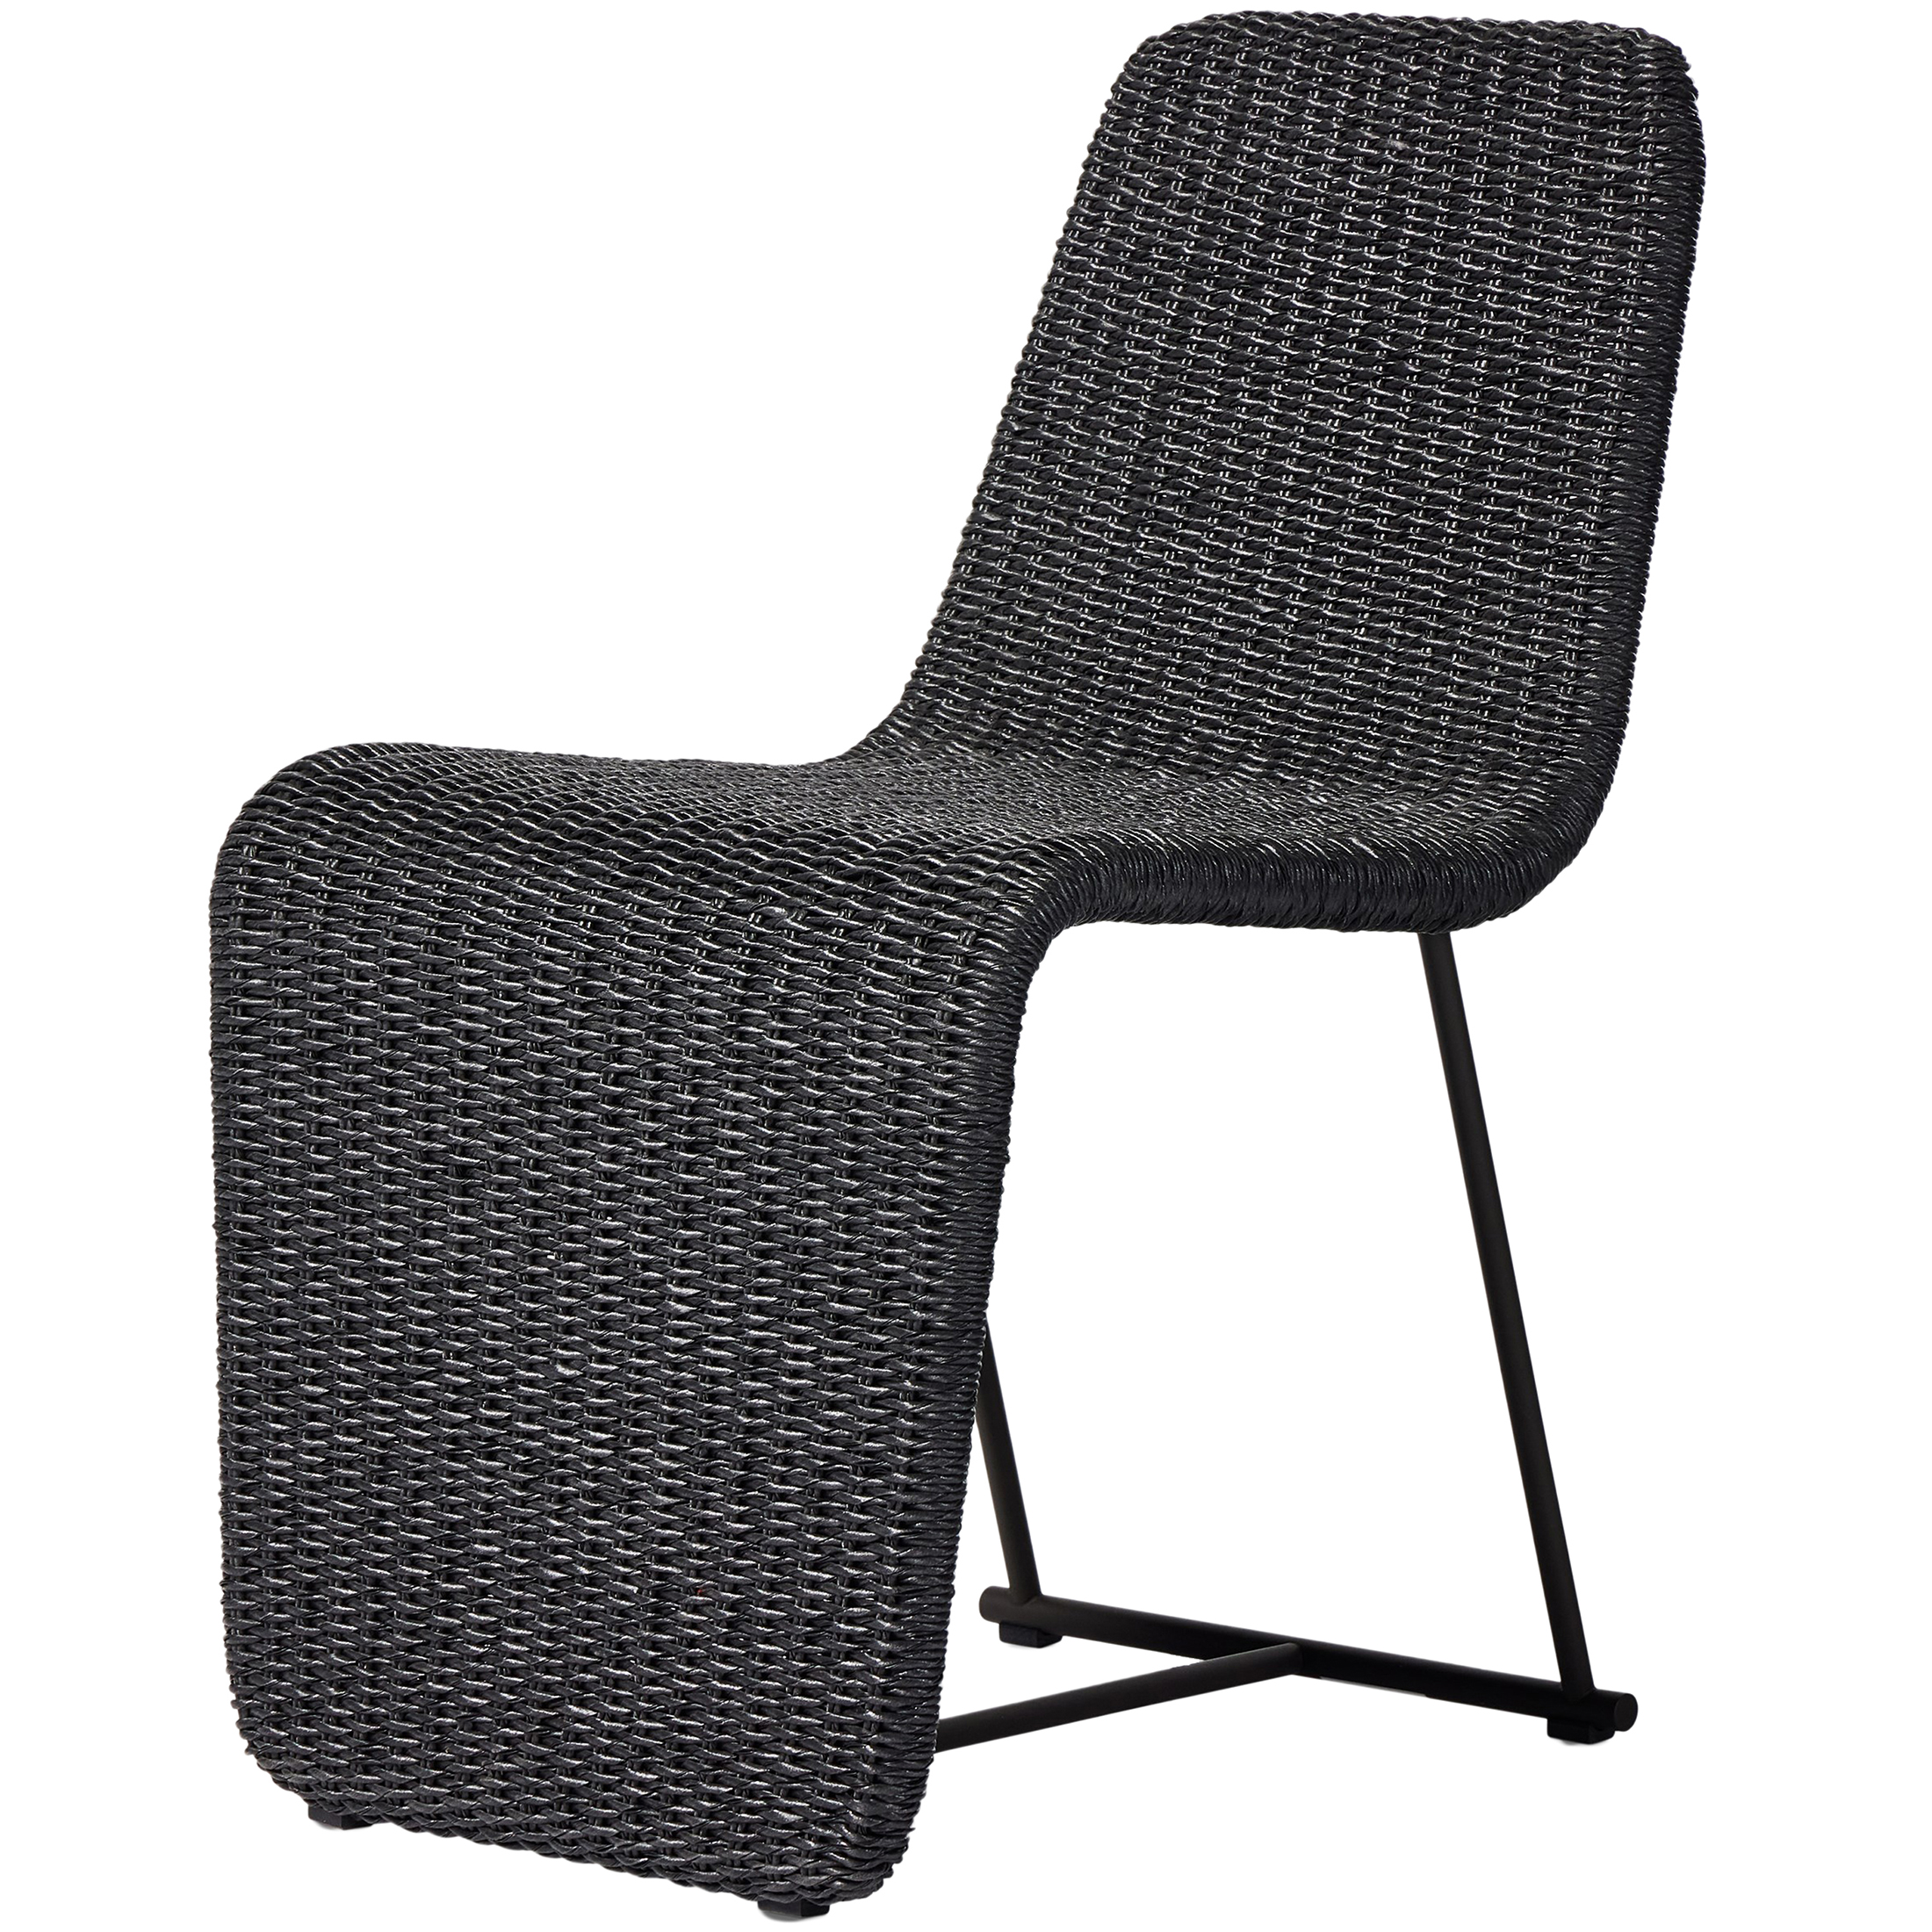 Paulina Outdoor Woven Dining Chair